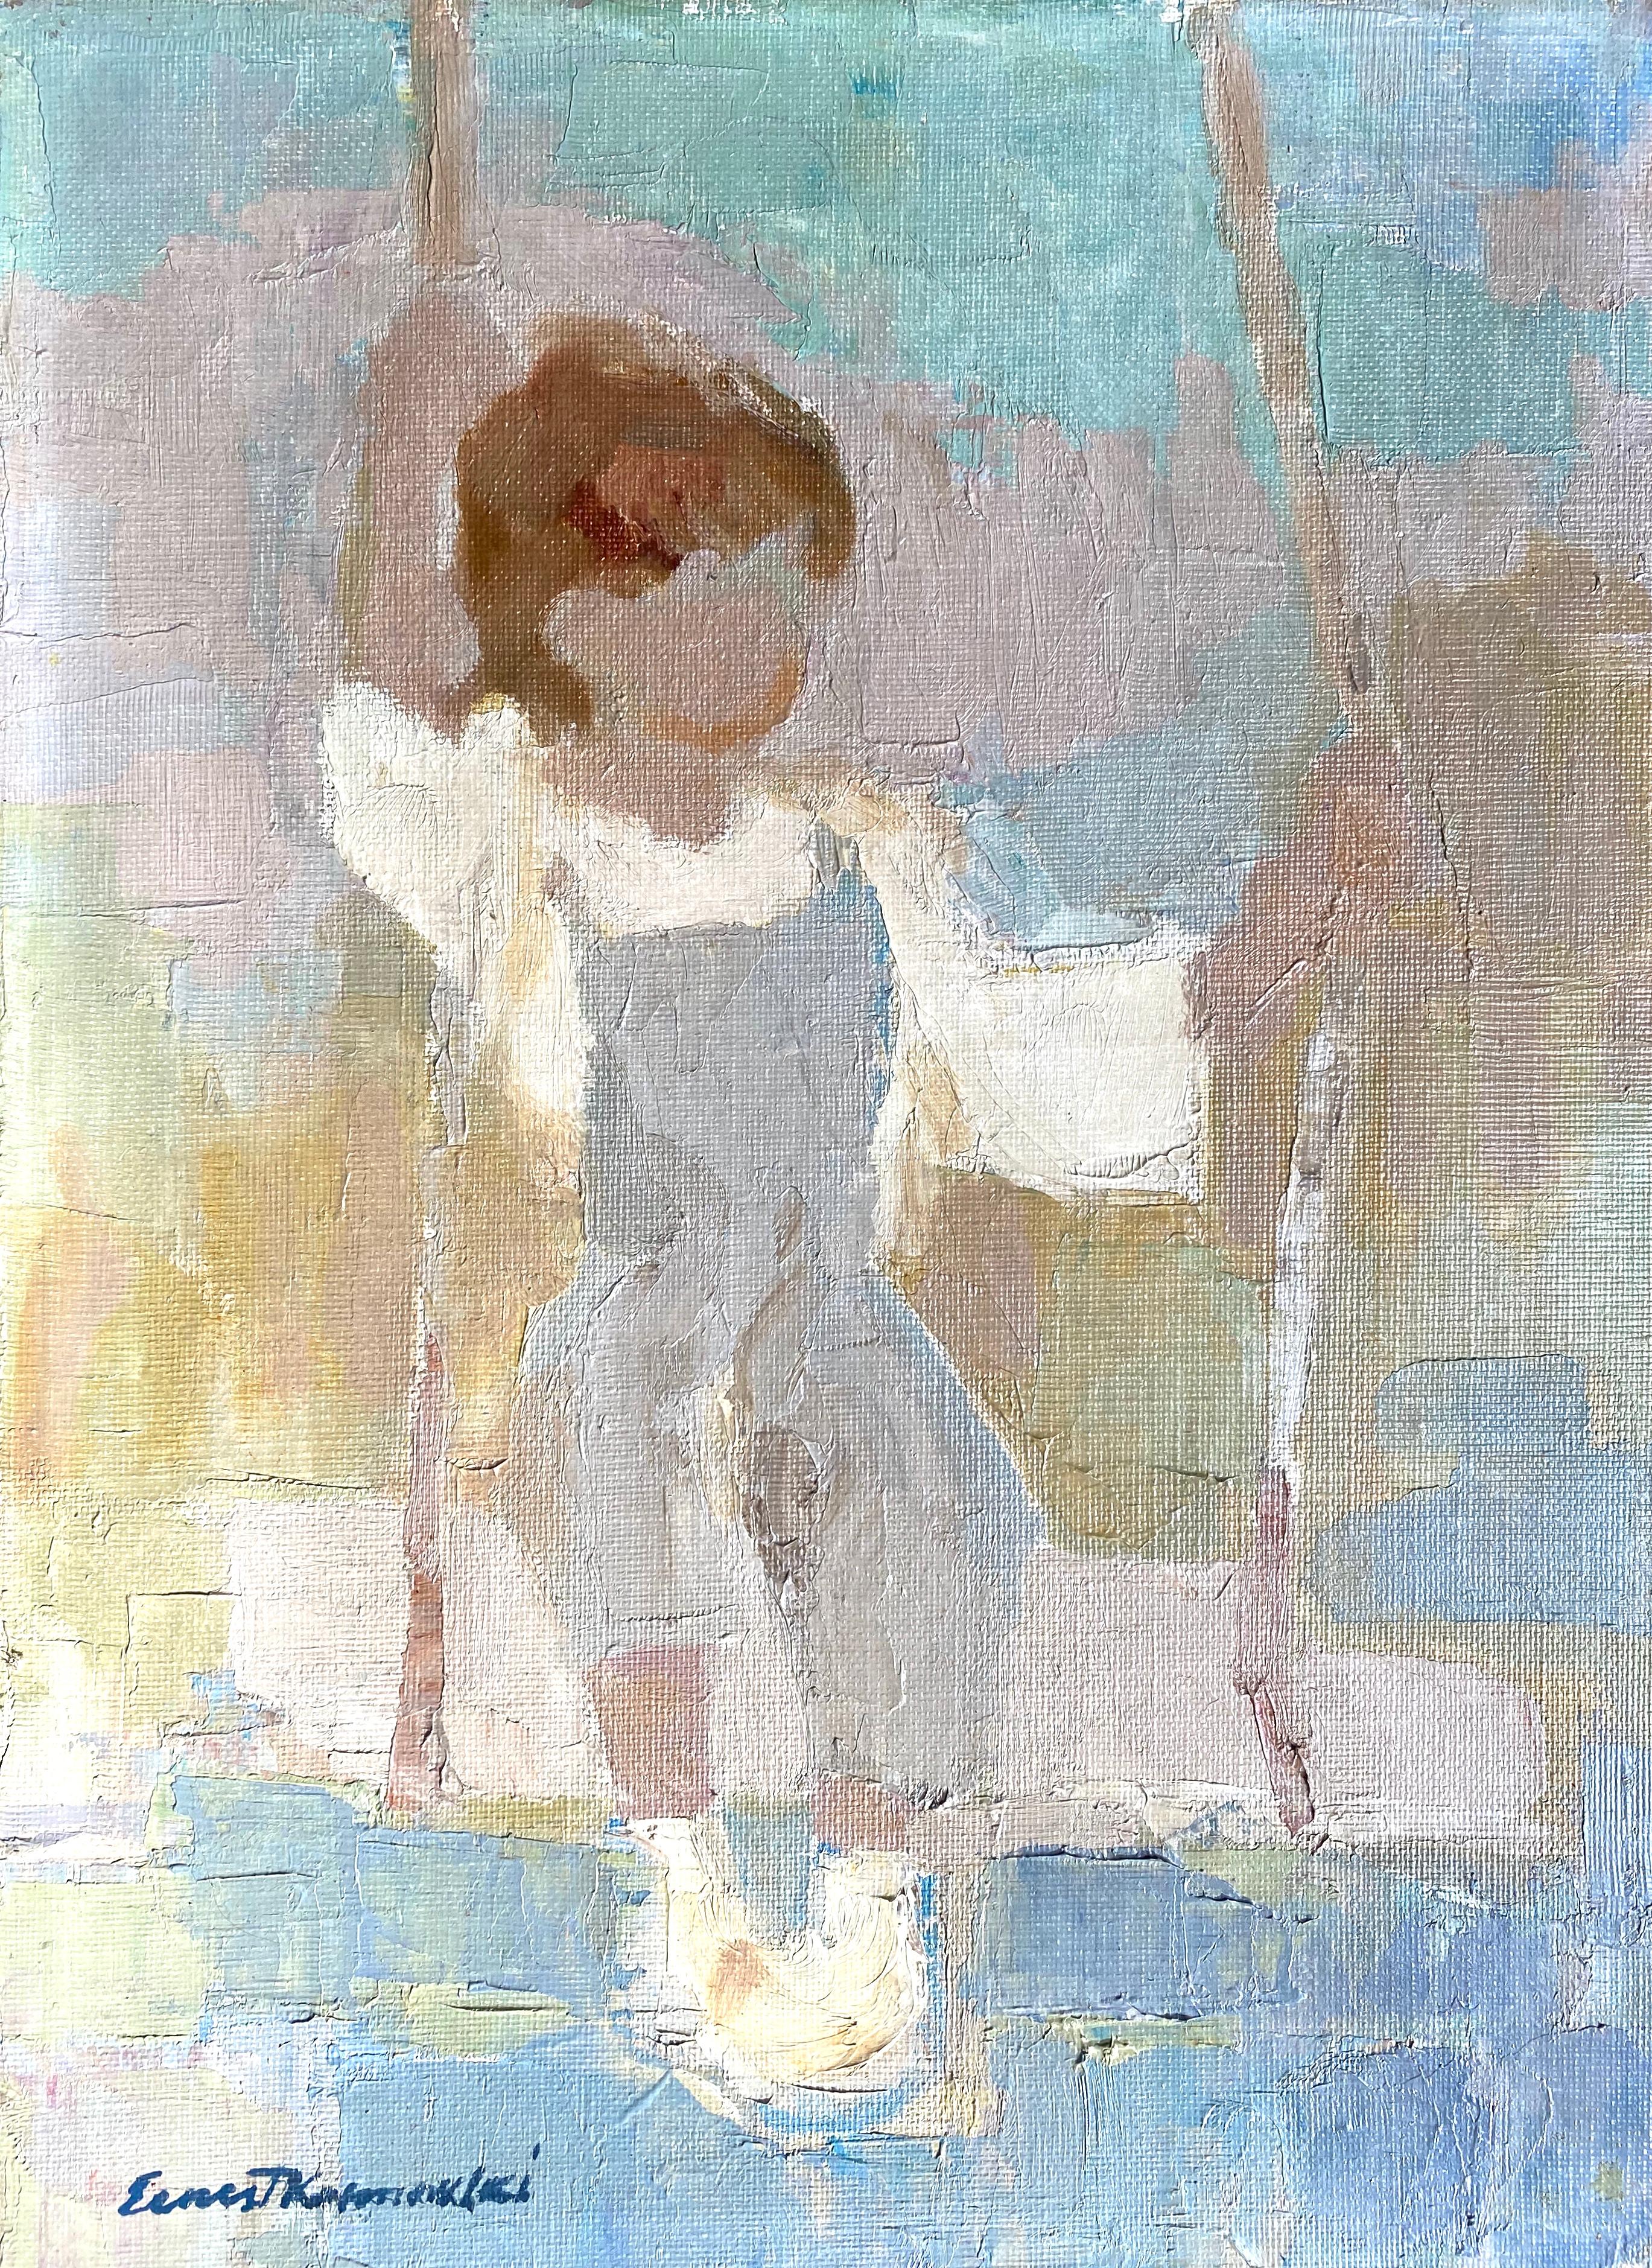 “Child on a Swing”